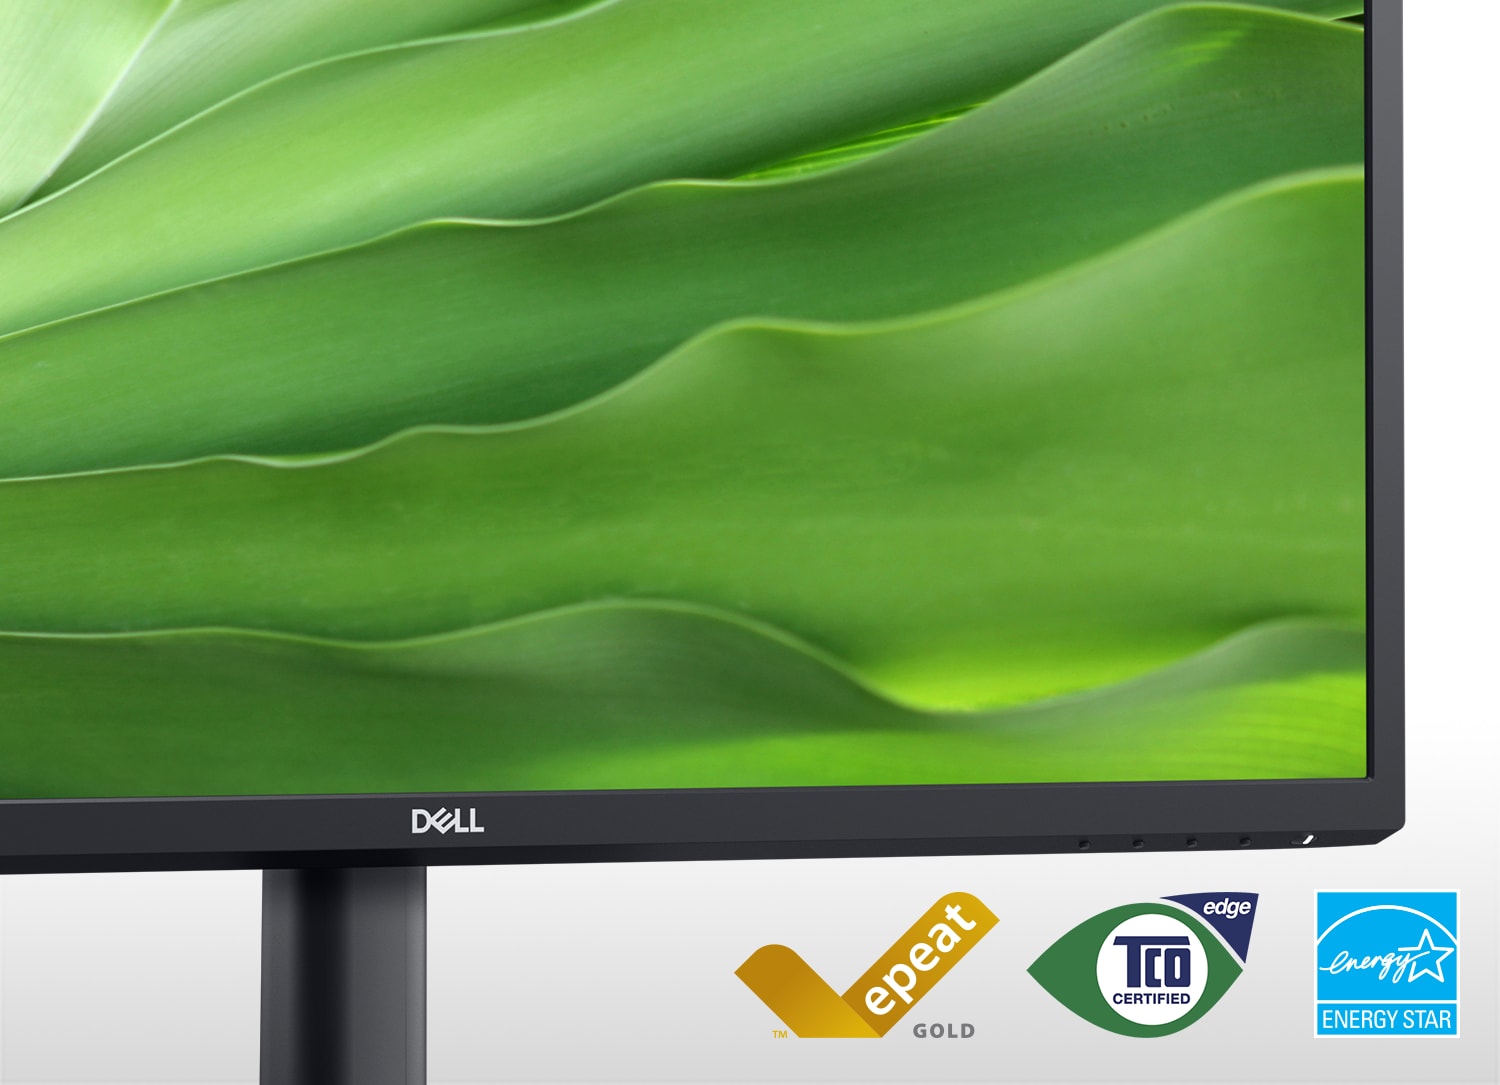 Picture of a Dell E2723H Monitor green leaves on the screen.